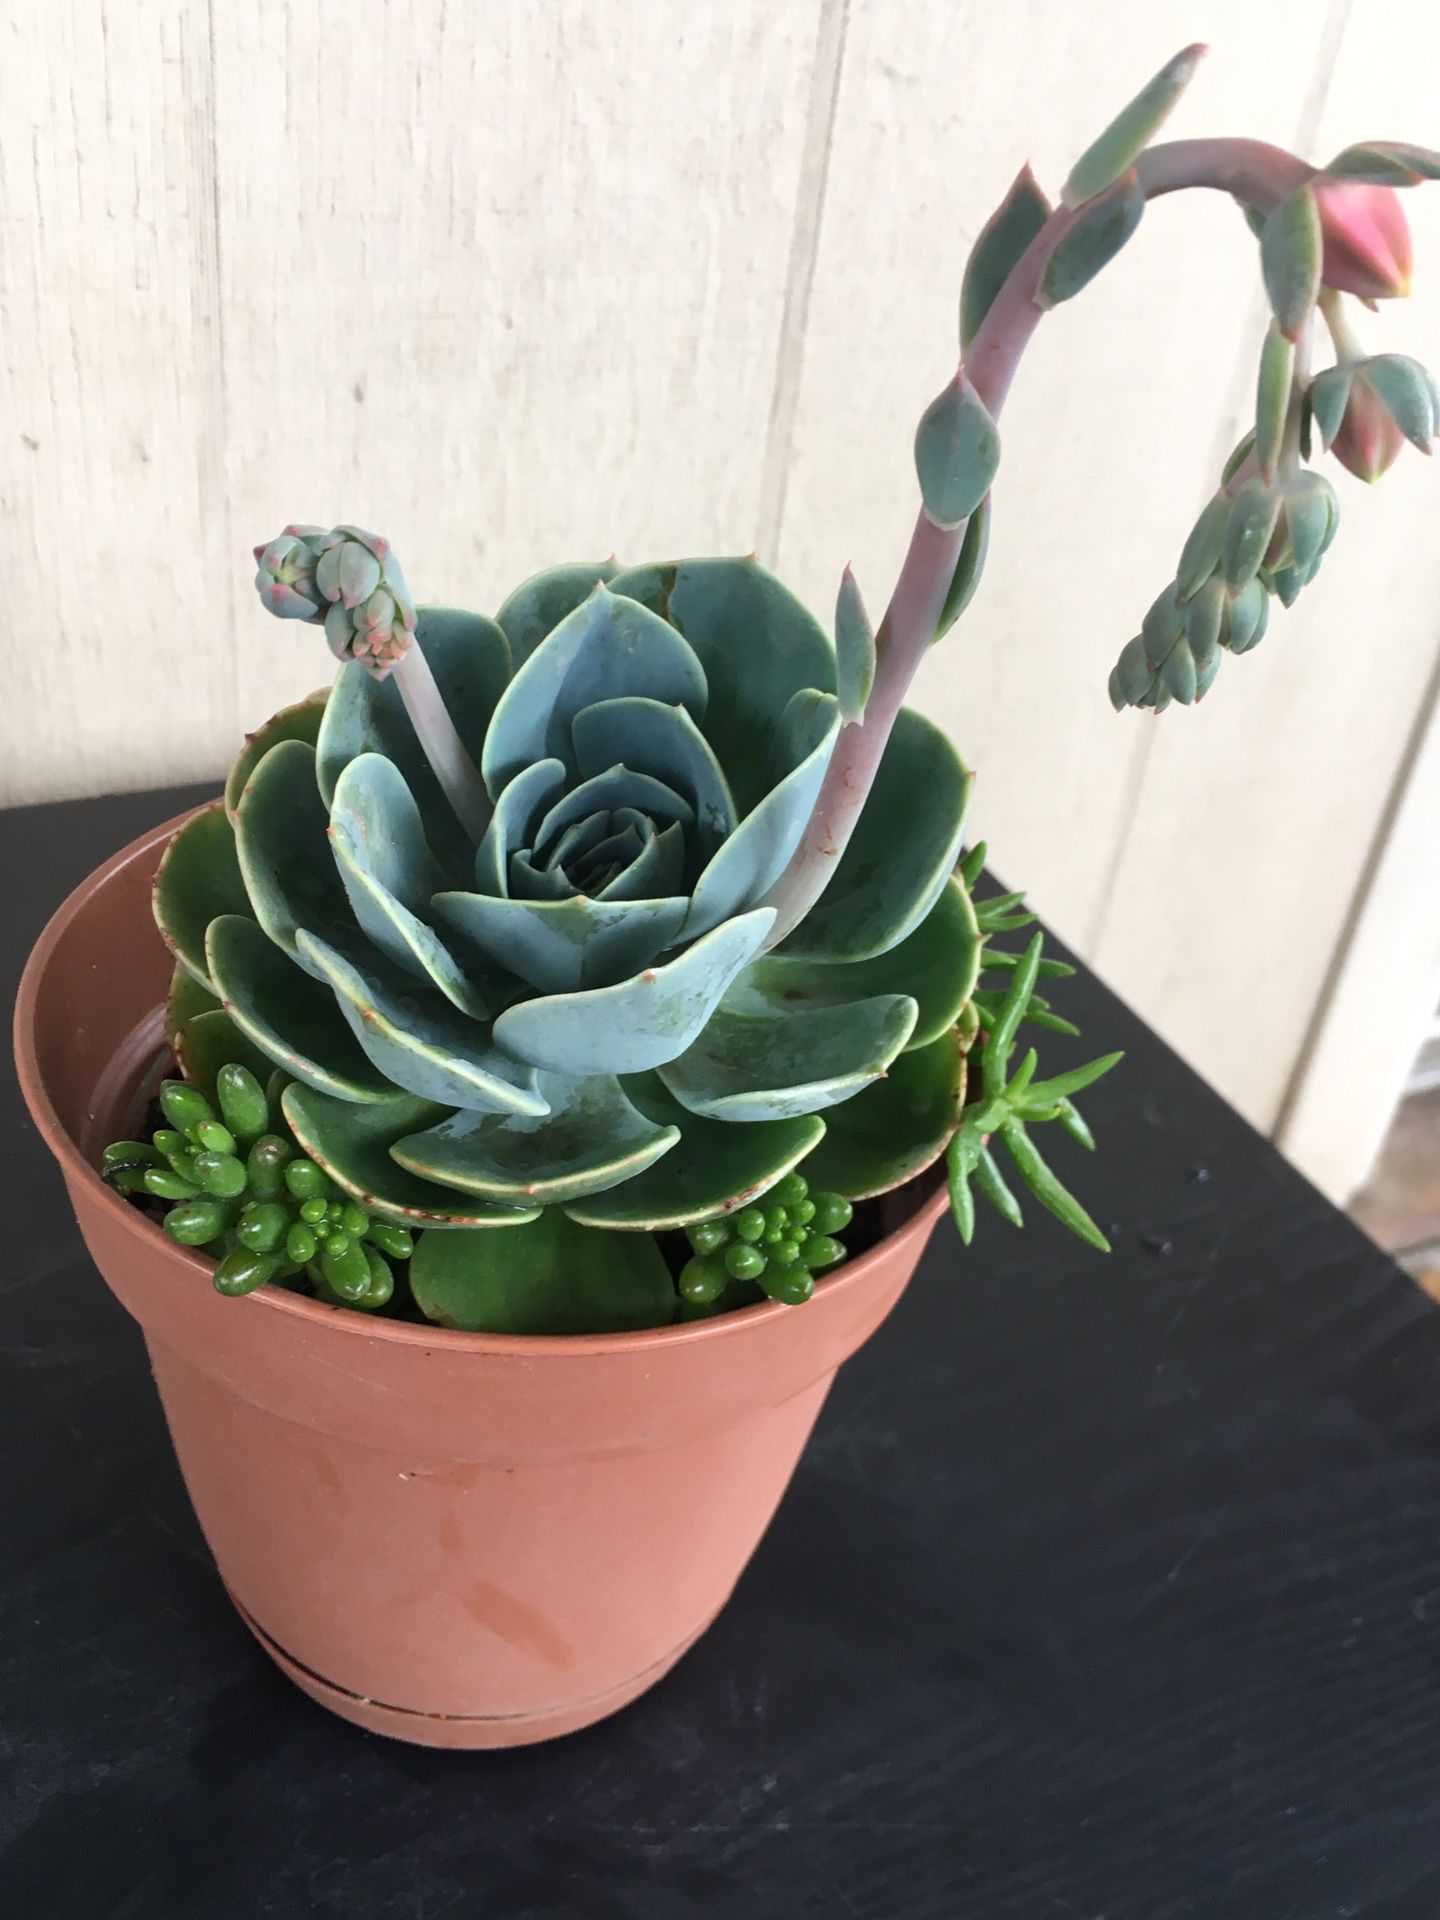 3 Different Succulent Plants In One Pot